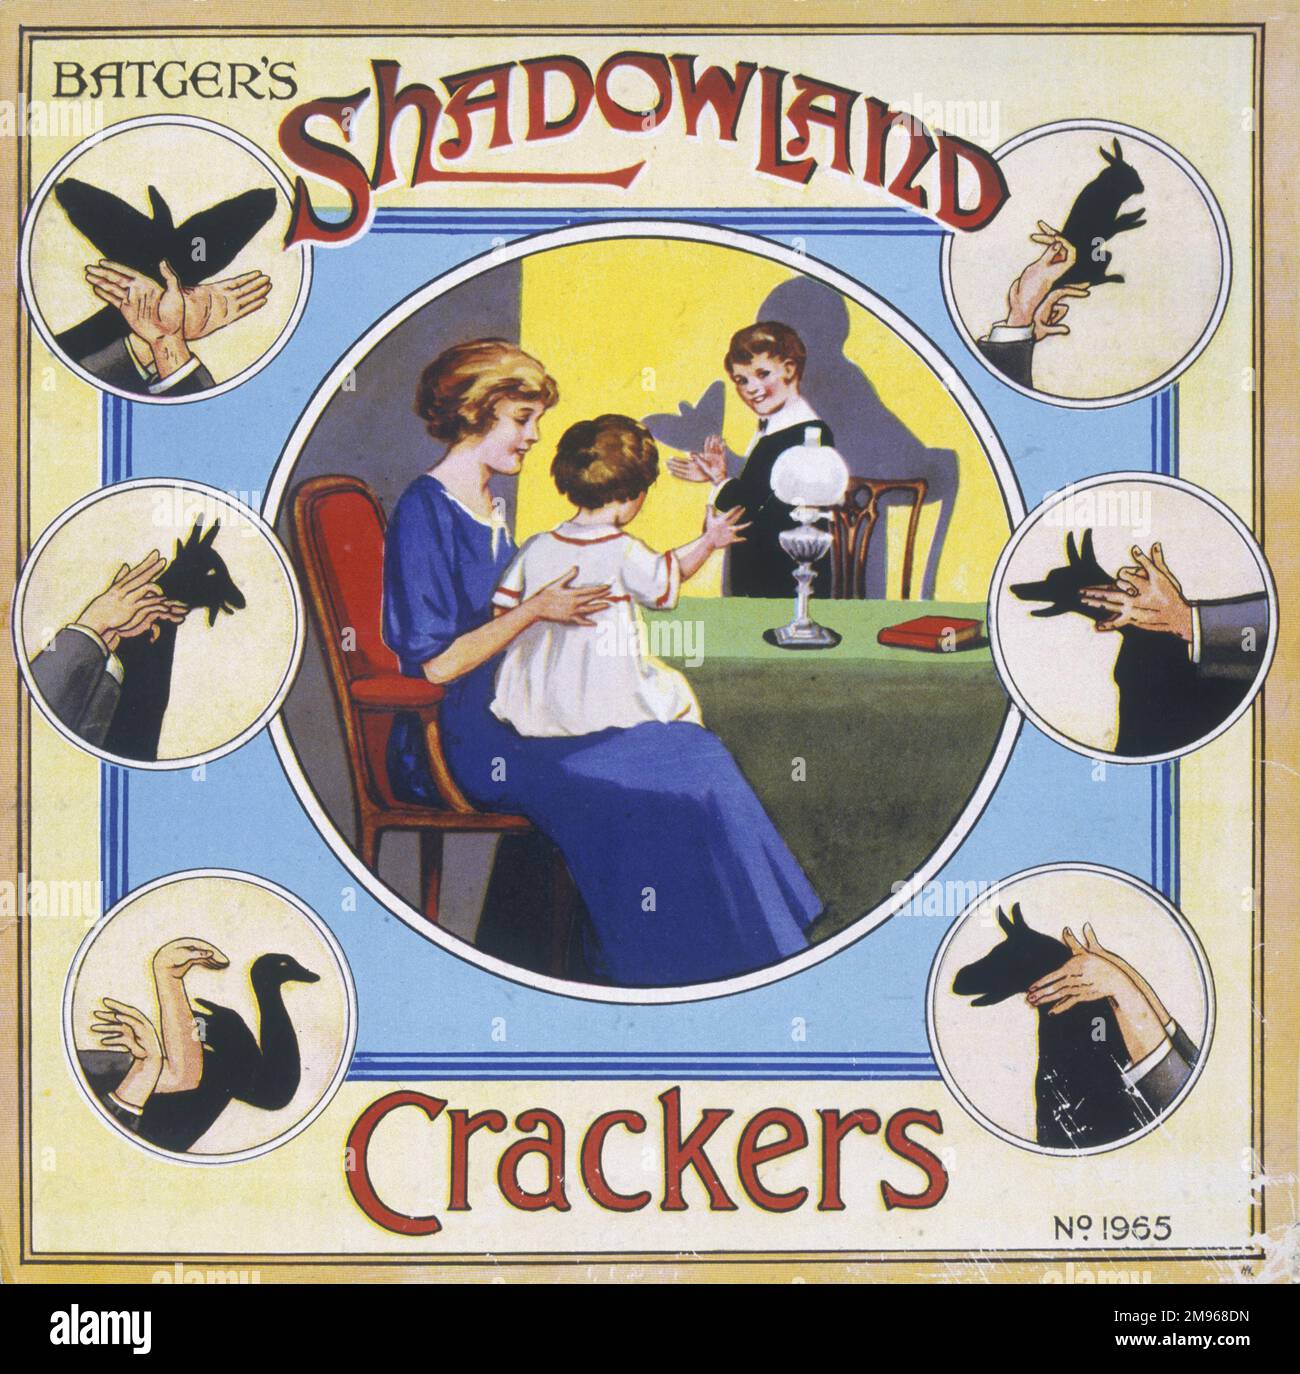 Label for a box of Batgers Shadowland Christmas crackers with instructions on how to make various hand shadow animals. Stock Photo